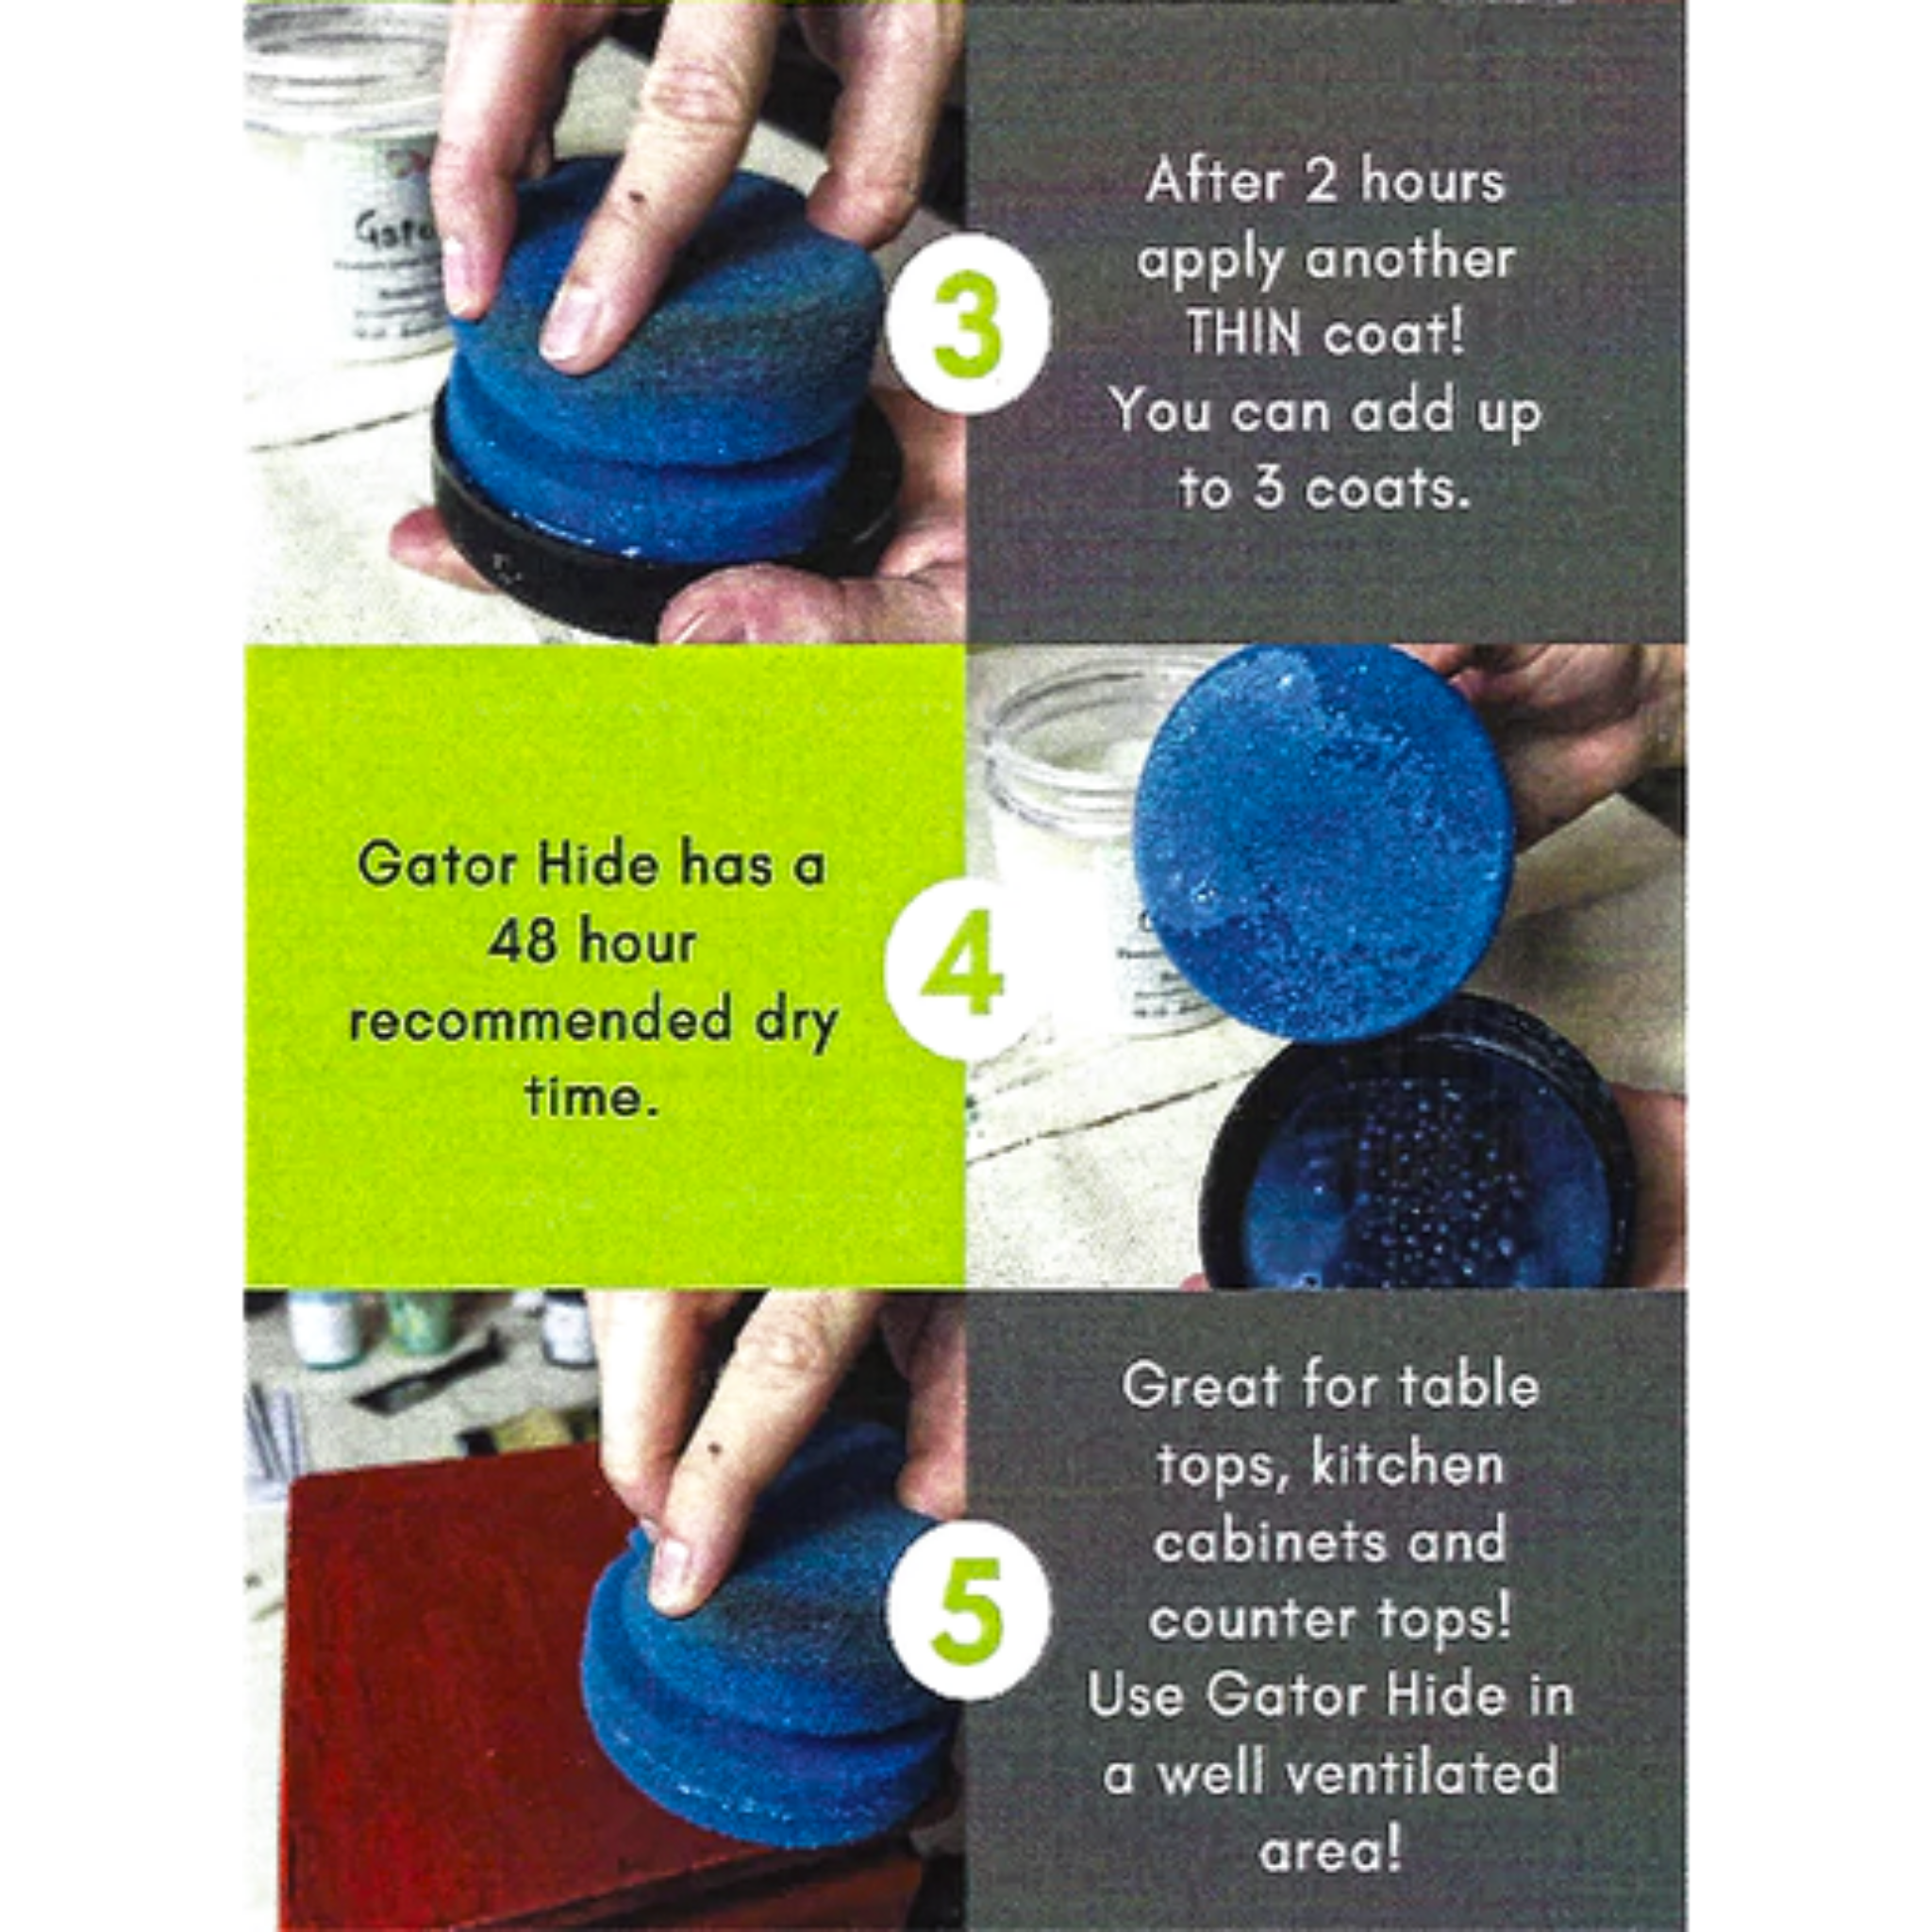 Directions for Dixie Belle Paint's Gator Hide using their Blue Sponge Applicator. Step 3 - After 2 hours apply another THIN coat! You can add up to 3 coats. Step 4 - Gator Hide has a 48 hour recommended dry time. Step 5 - Great for table tops, kitchen cabinets and counter tops! Use Gator Hide in a well ventilated area!